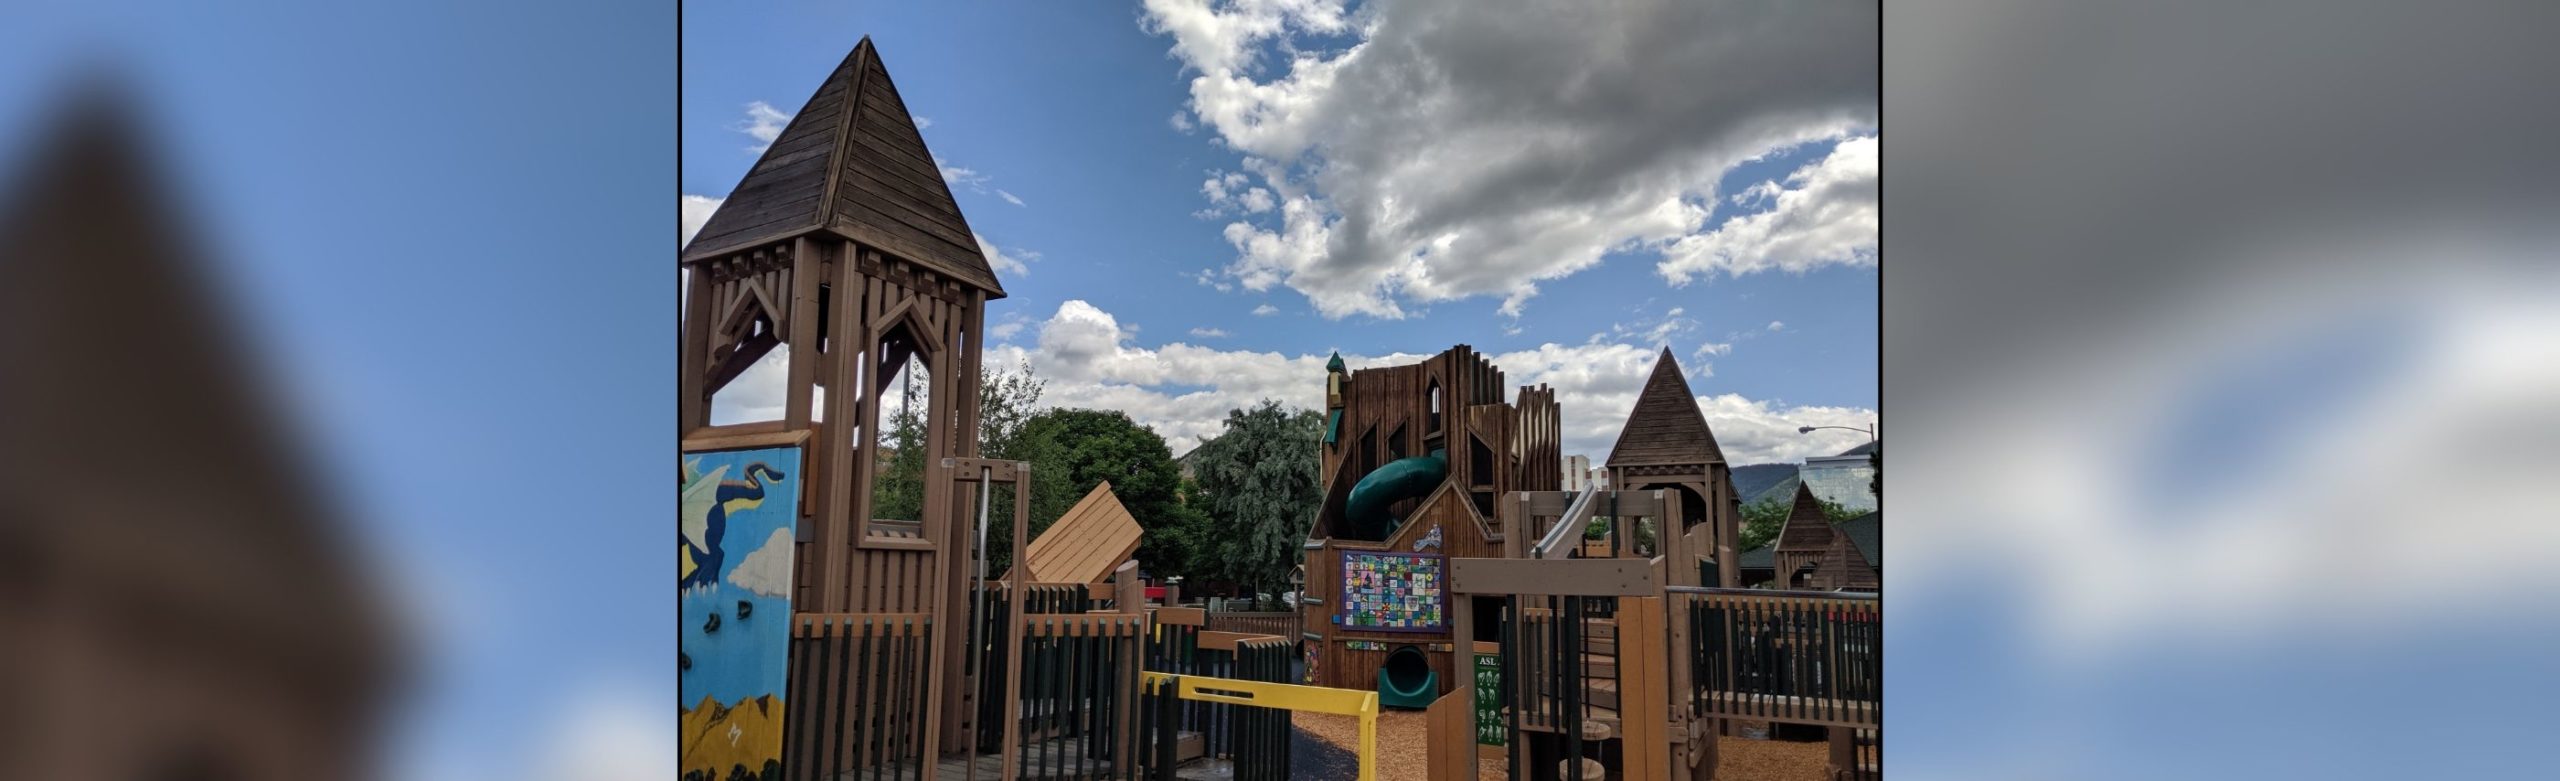 Kiwanis in Action: From KettleHouse Amphitheater to the Dragon Hollow Playground Image